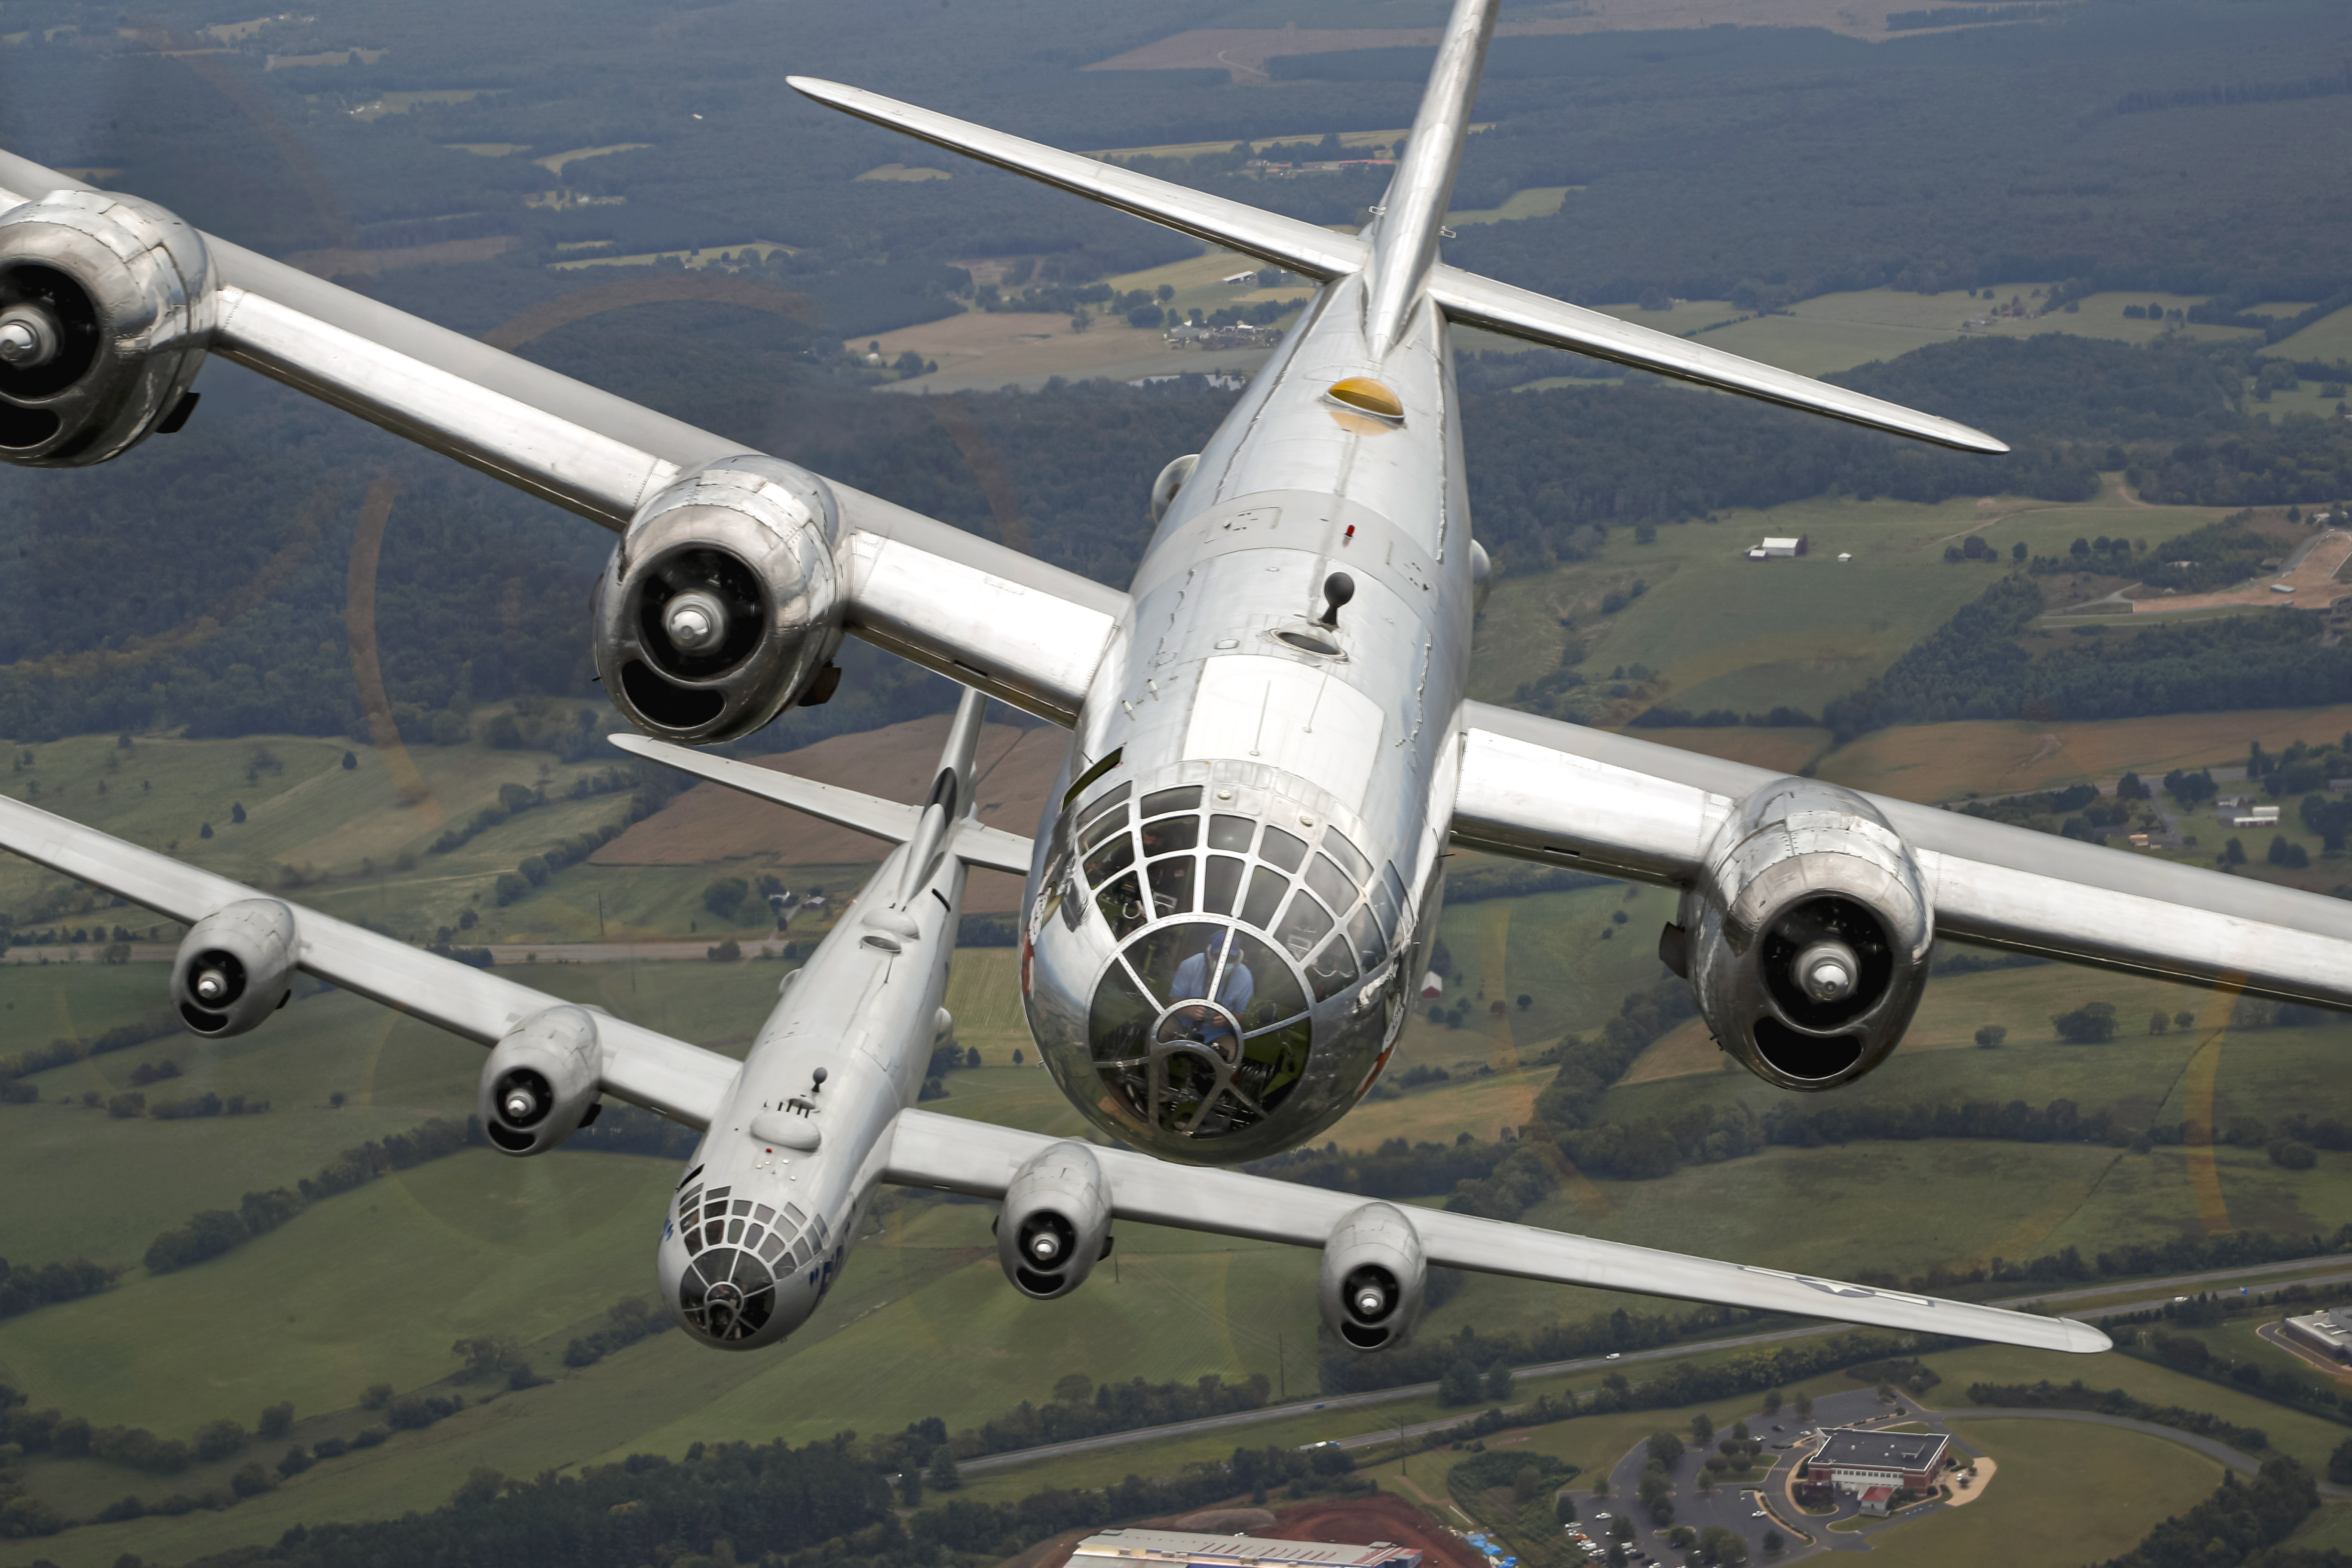 The Boeing B-29 Super Fortress "Doc" and "FiFi" participate in formation practice September 25, 2020. Photo by Chris Rose.